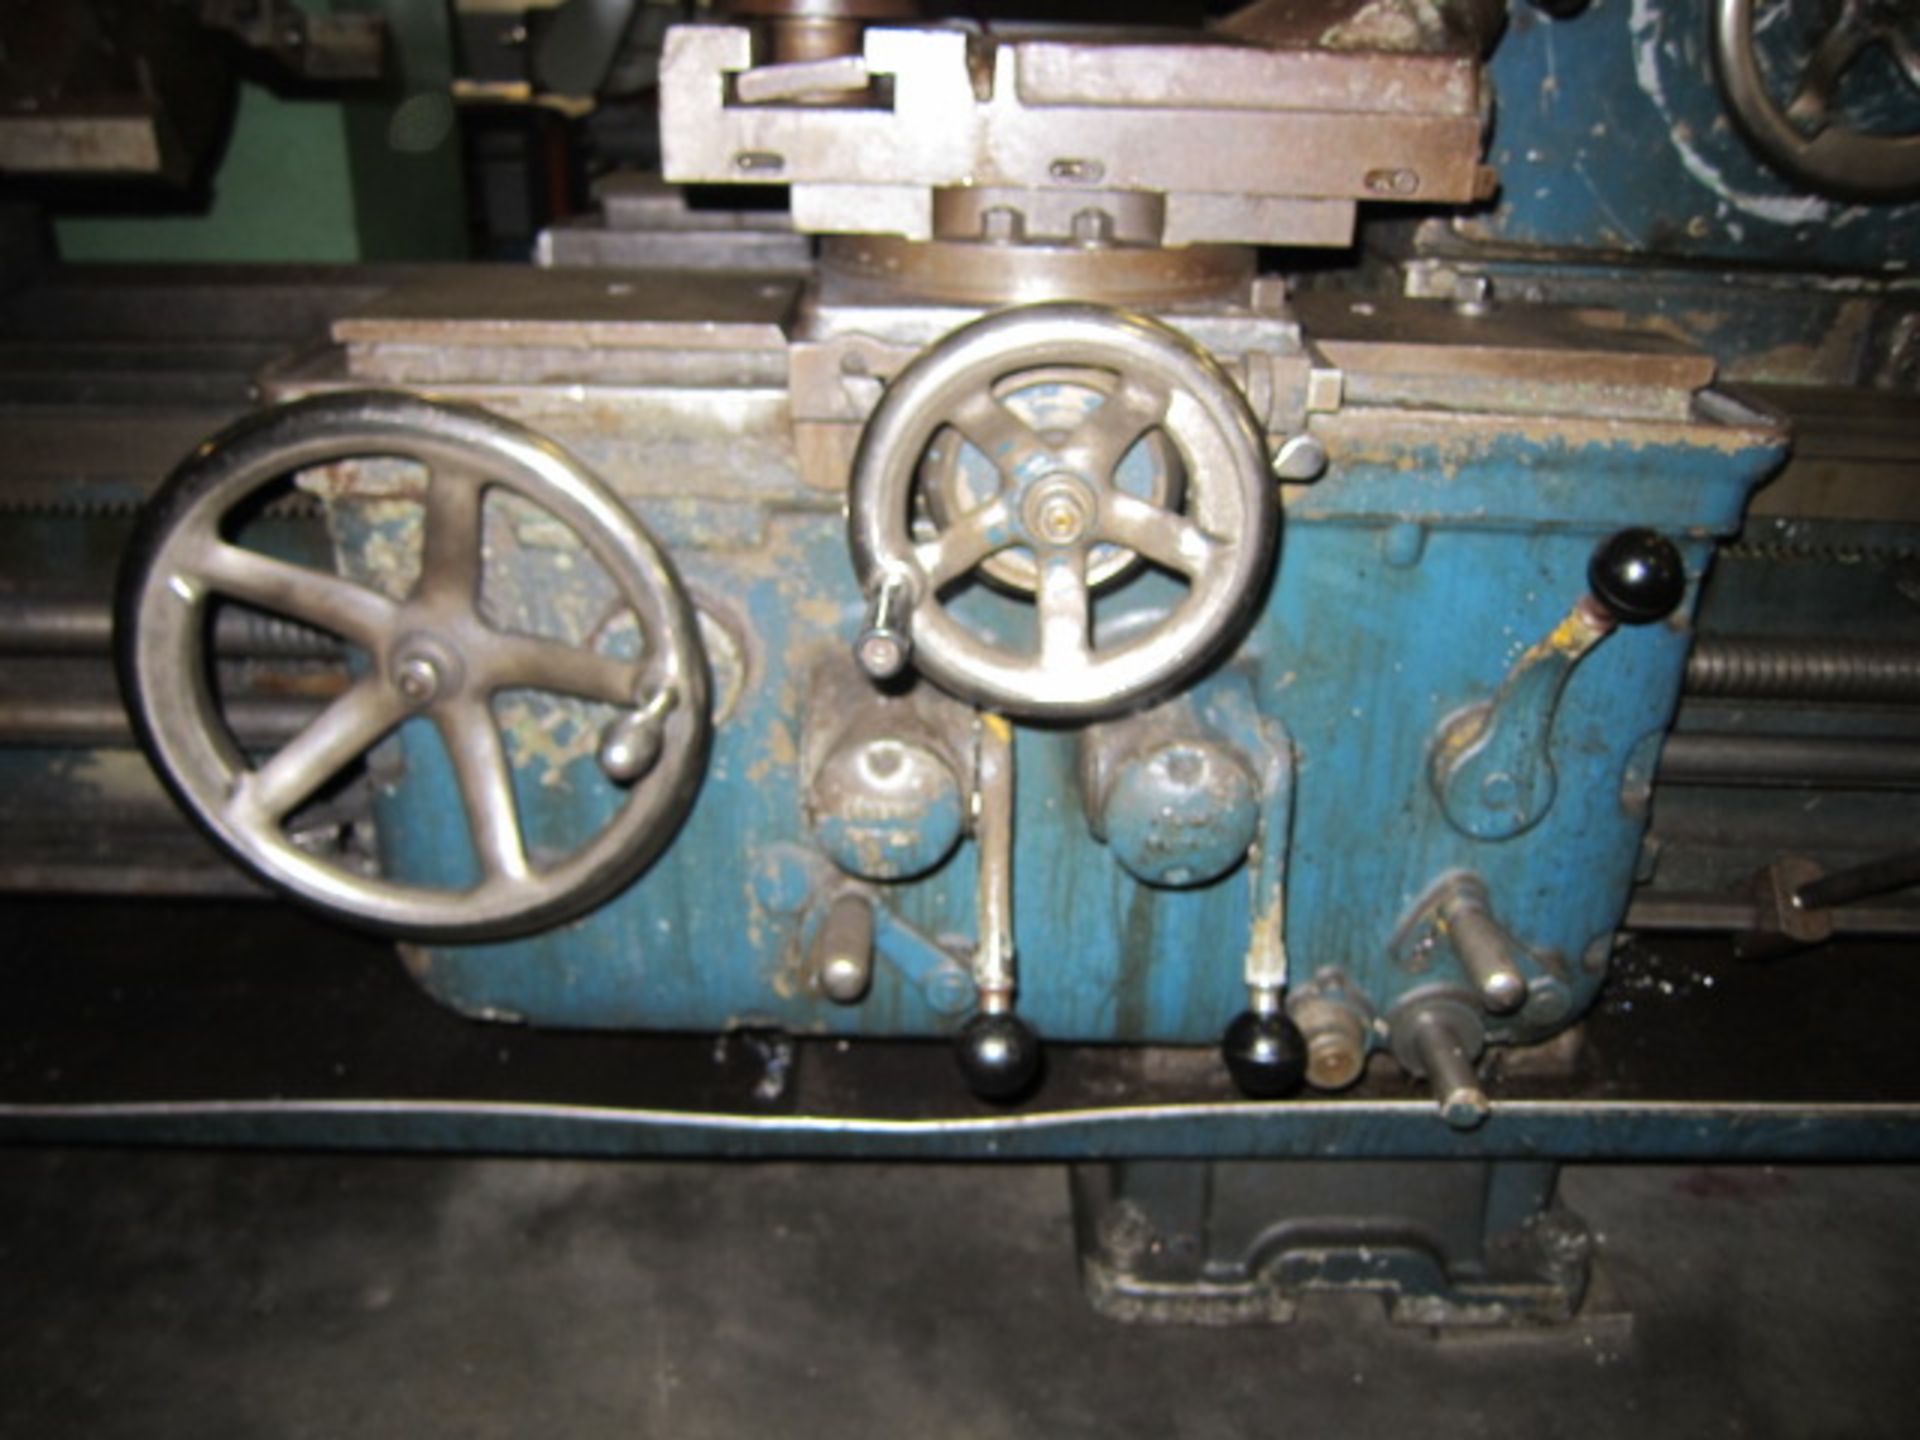 ENGINE LATHE, AXELSON 27-1/2" X 96", spds: 20-300 RPM, 2-axis D.R.O., 16" dia. 3-jaw chuck, (4) - Image 6 of 7